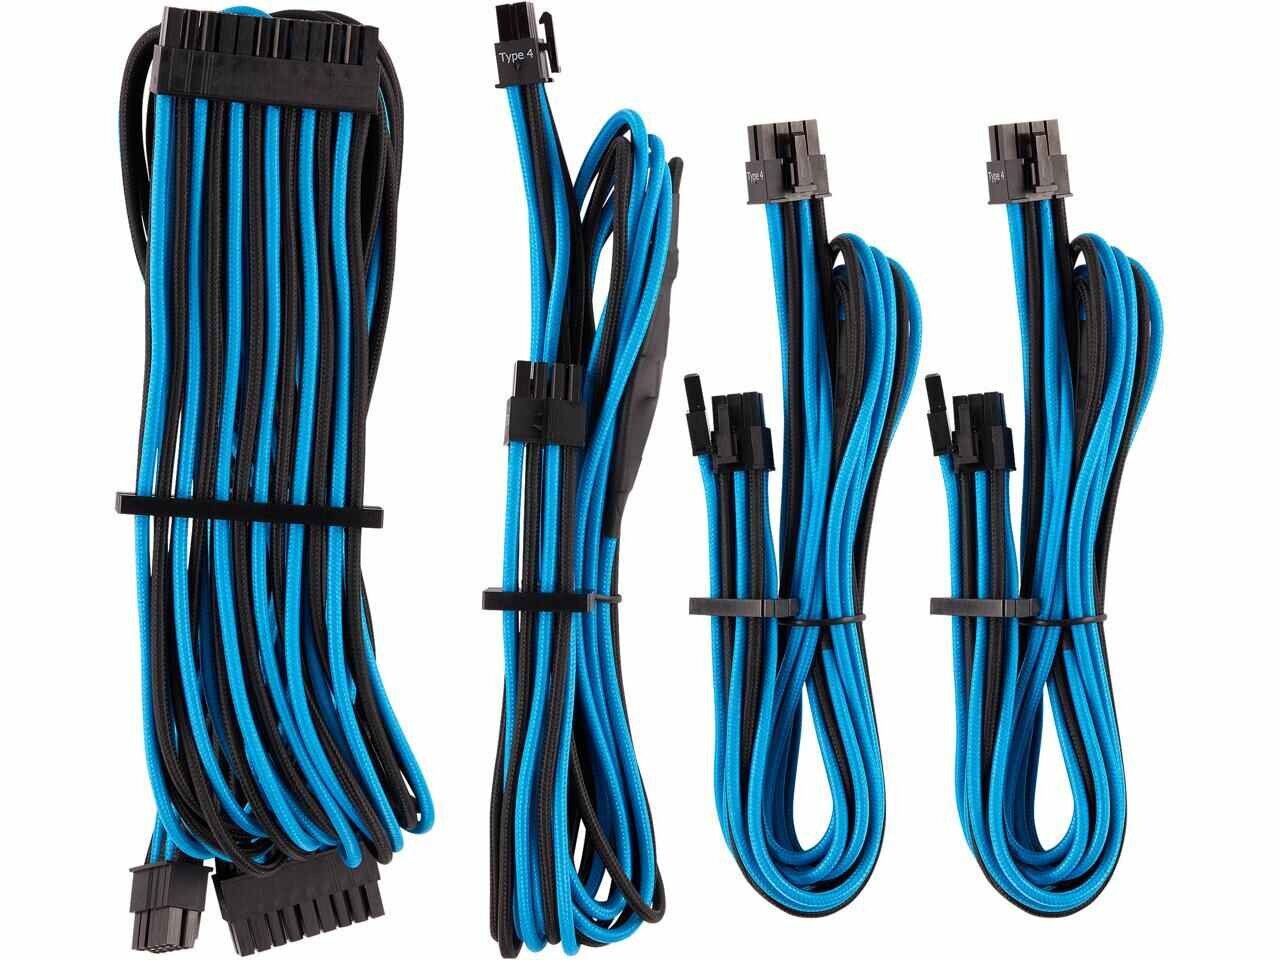 Custom pc cables